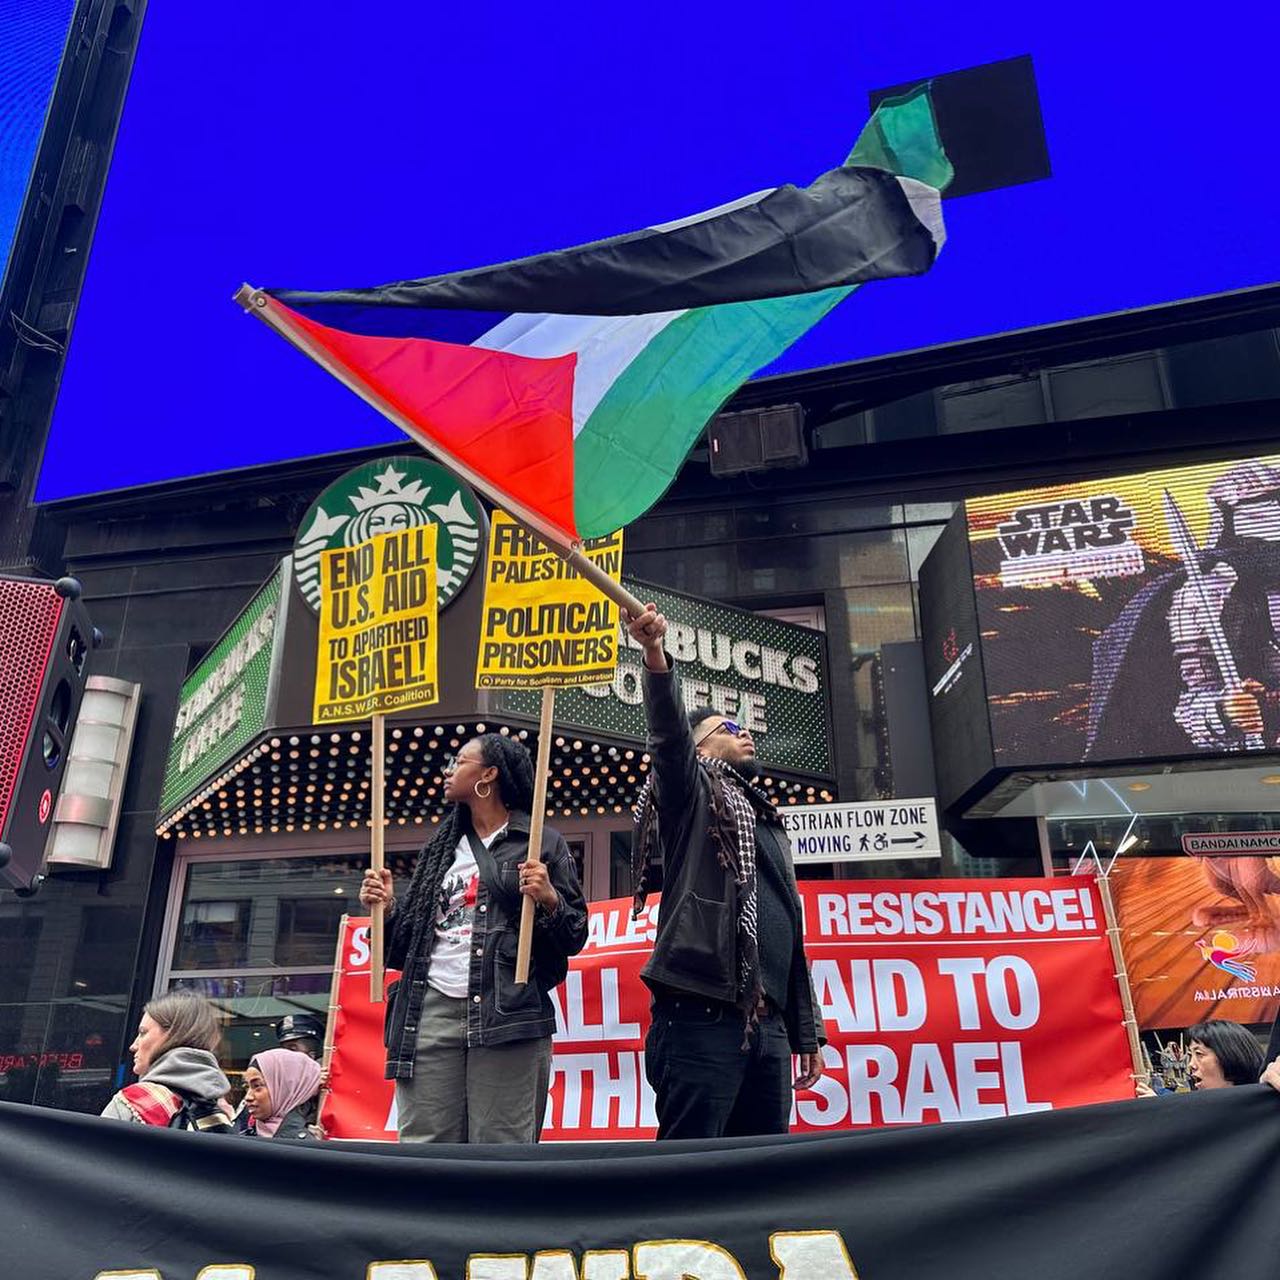 In New York City, US, people protest in support of Palestinian resistance and an end to US aid to Israel. Photo: Instagram/@peoplesforumnyc.